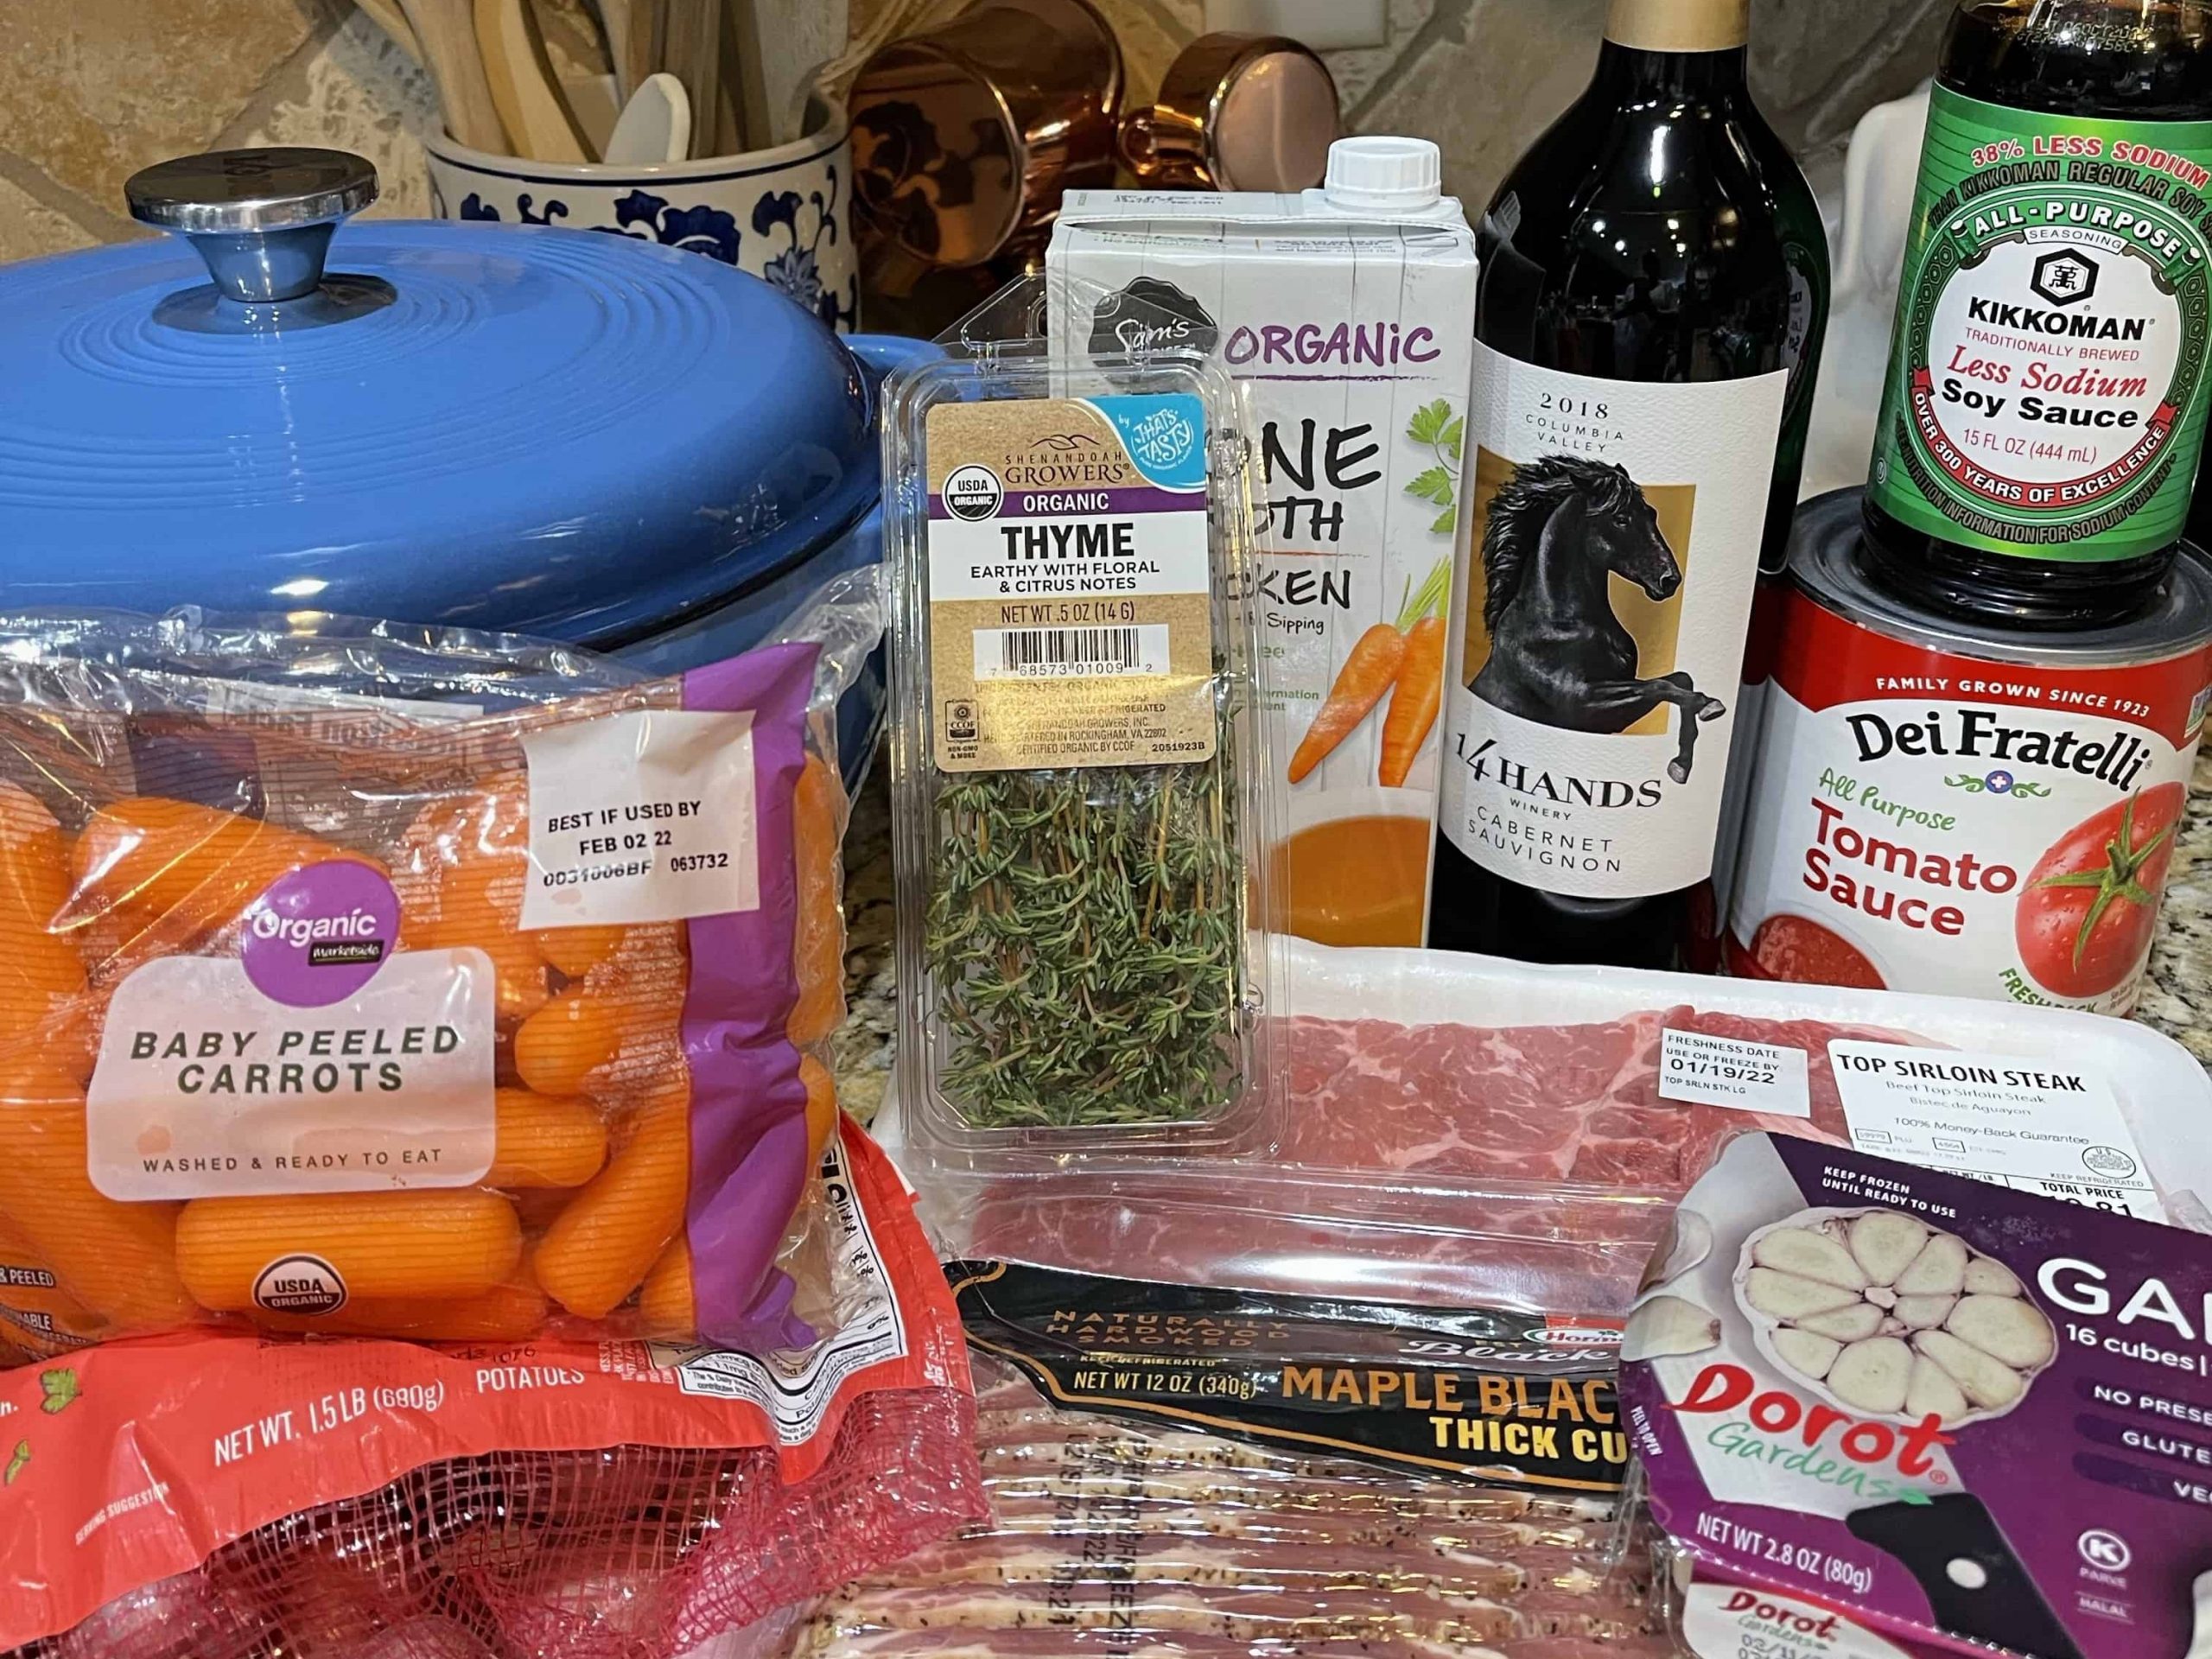 My Beef Bourguignon Instant Pot Ingredients: baby carrots, garlic, soy sauce, thyme, tomato sauce, chicken broth, beef, bacon